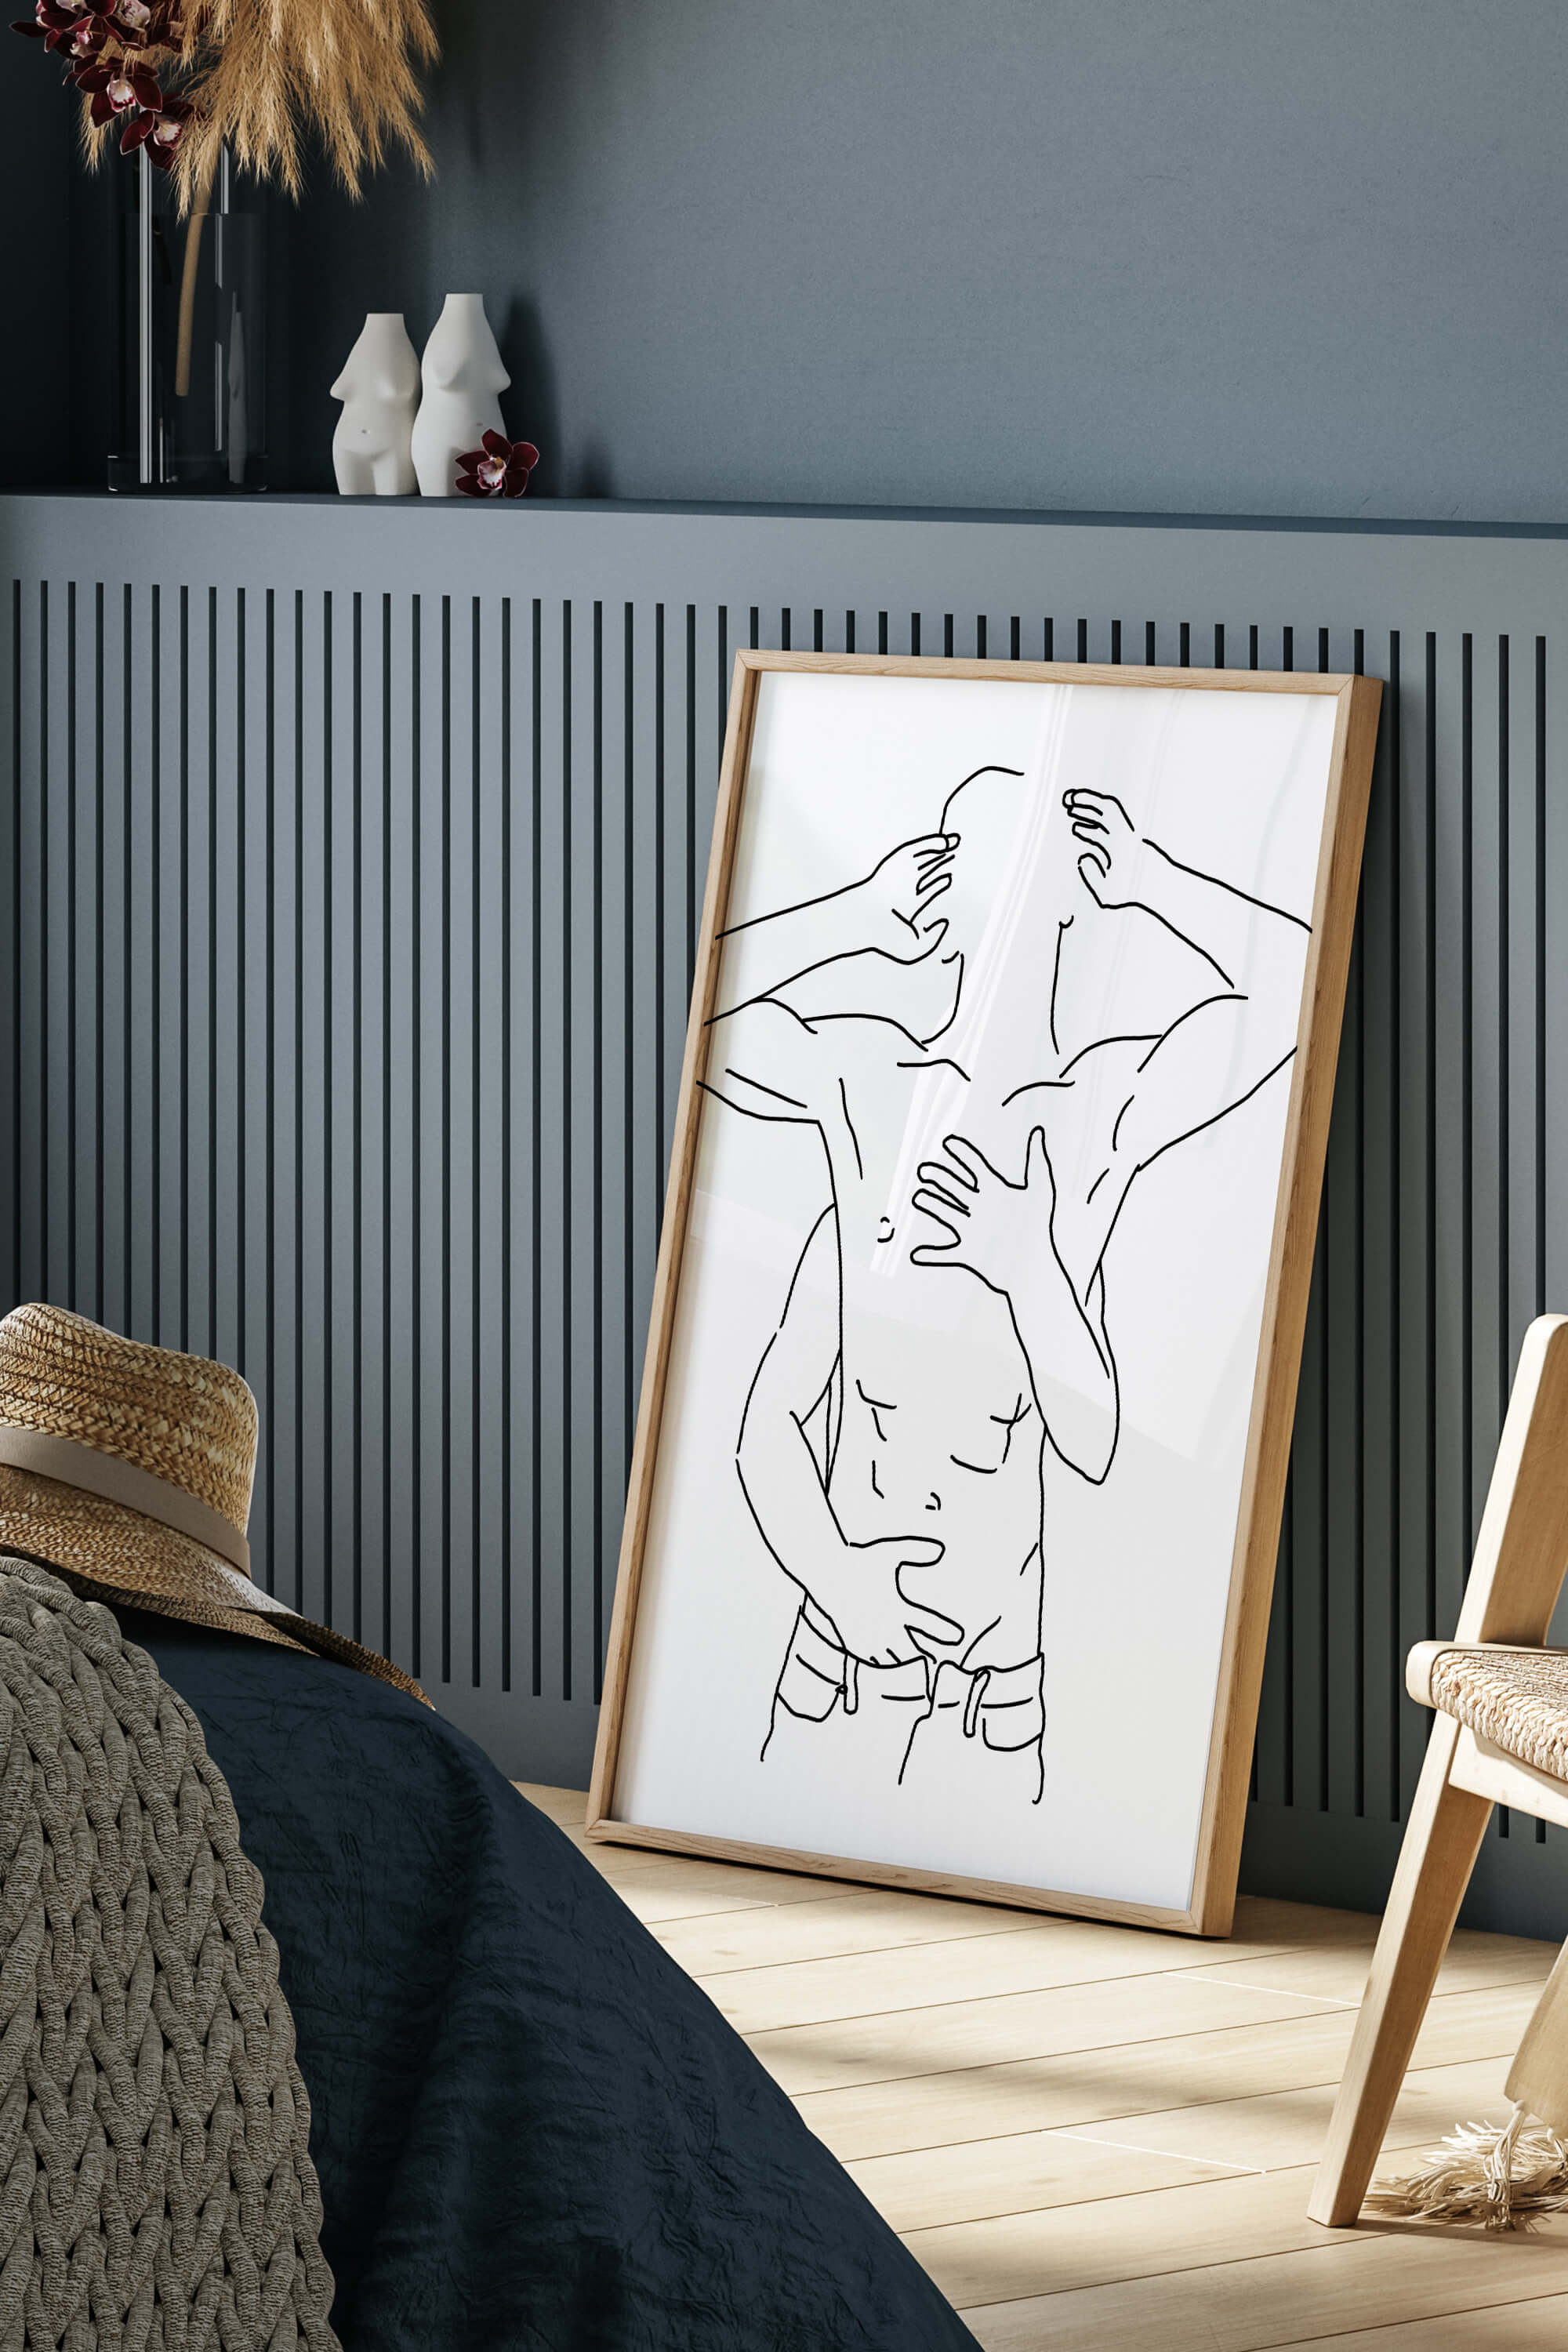 Conquer today with the monochrome magic of this men's couple line art. A visual journey into love and elegance, this print transforms spaces, creating an atmosphere of acceptance and warmth.